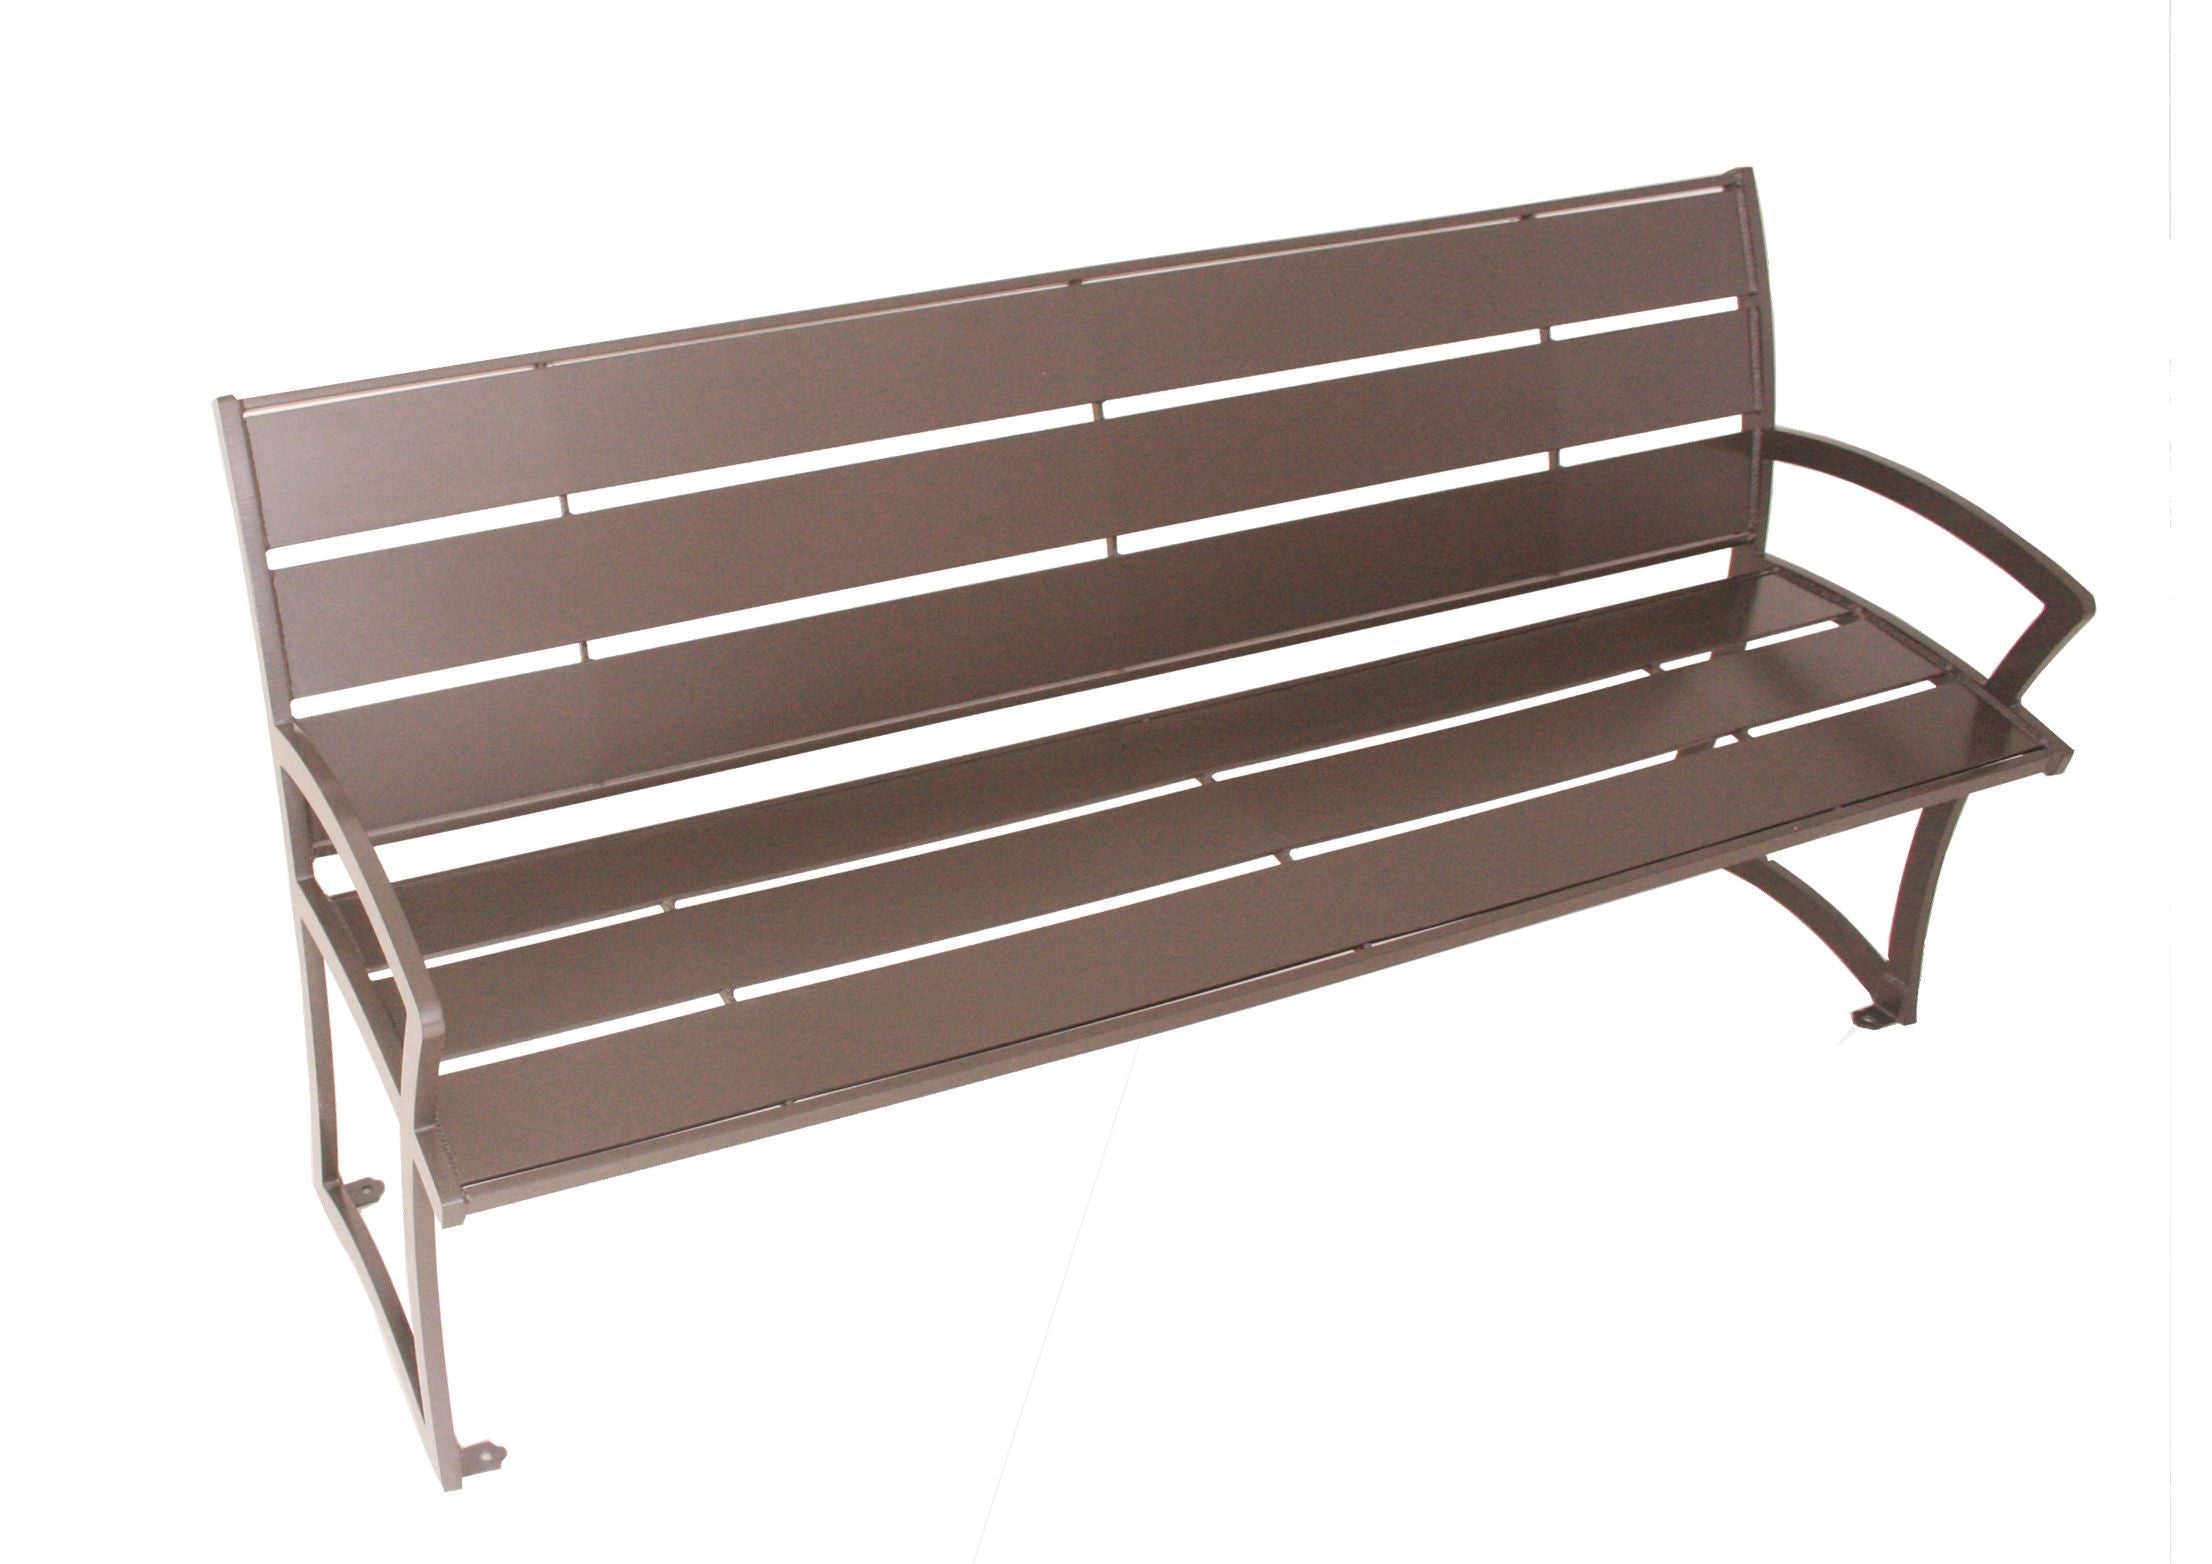 Madison Bench with Back - Powder Coated Steel | WillyGoat Playground & Park Equipment